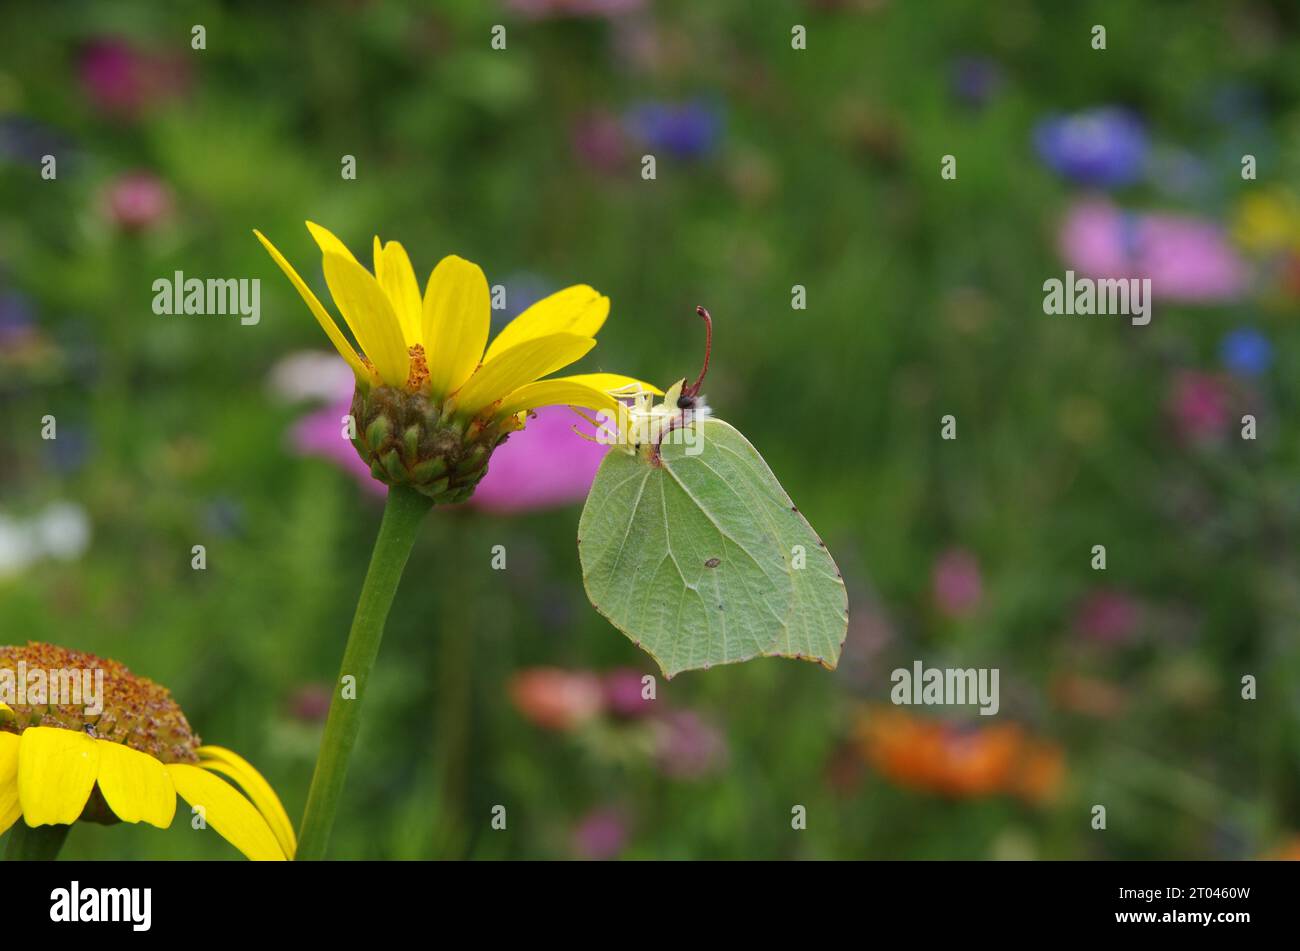 Butterfly, brimstone (Gonepteryx rhamni), female, flower, flower meadow, colourful, close-up, Germany, The lemon butterfly sits in a colourful flower Stock Photo